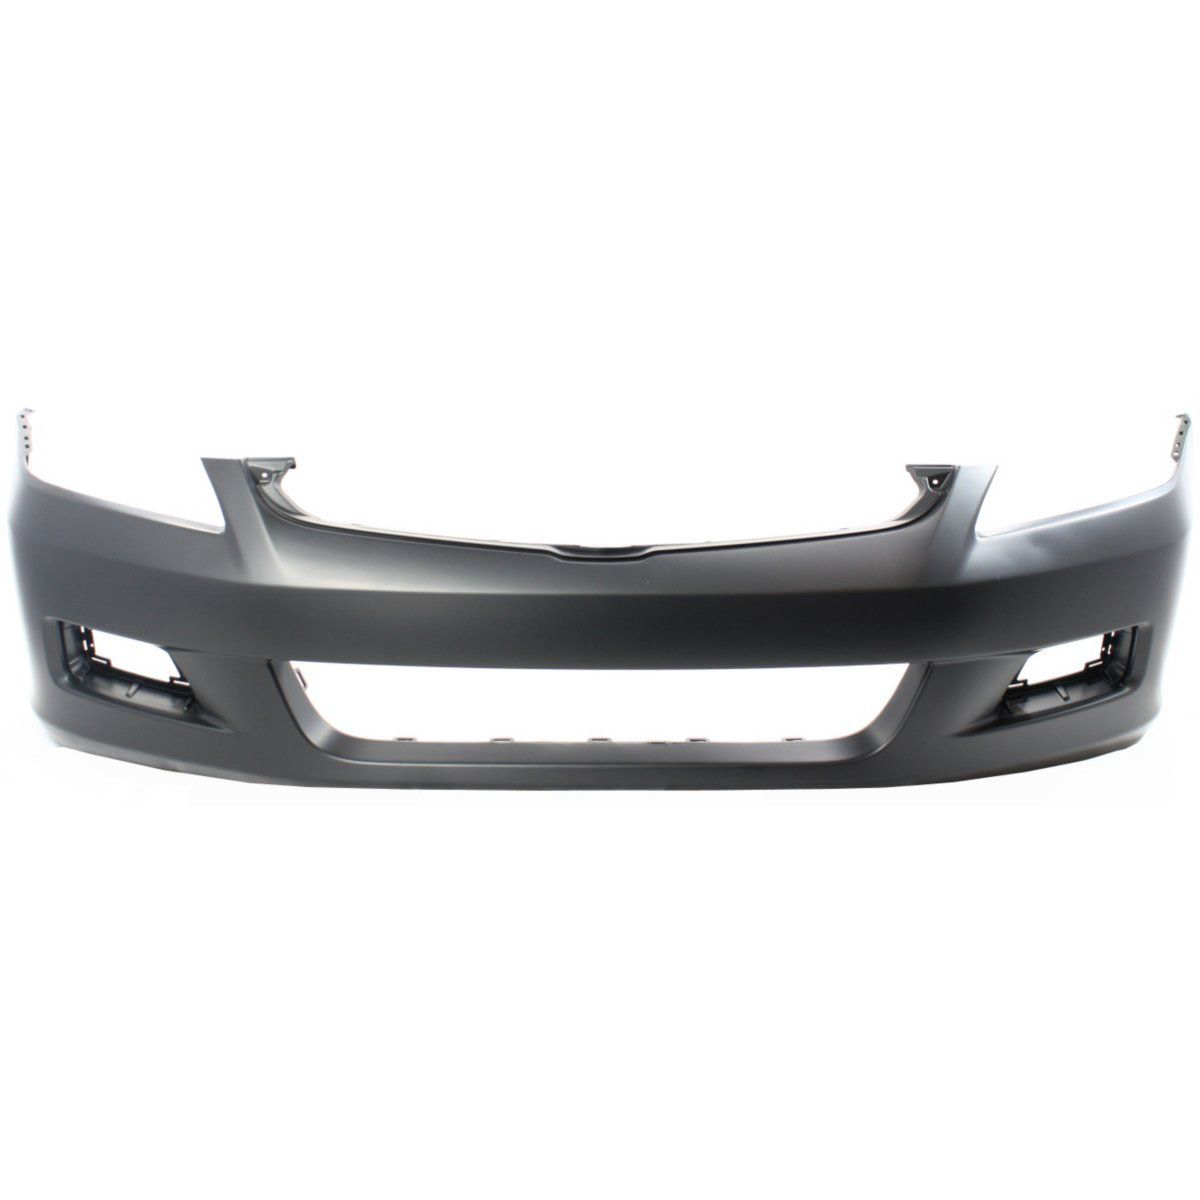 2006-2007 HONDA ACCORD Front Bumper Cover 4dr sedan  USA/Mexico built Painted to Match